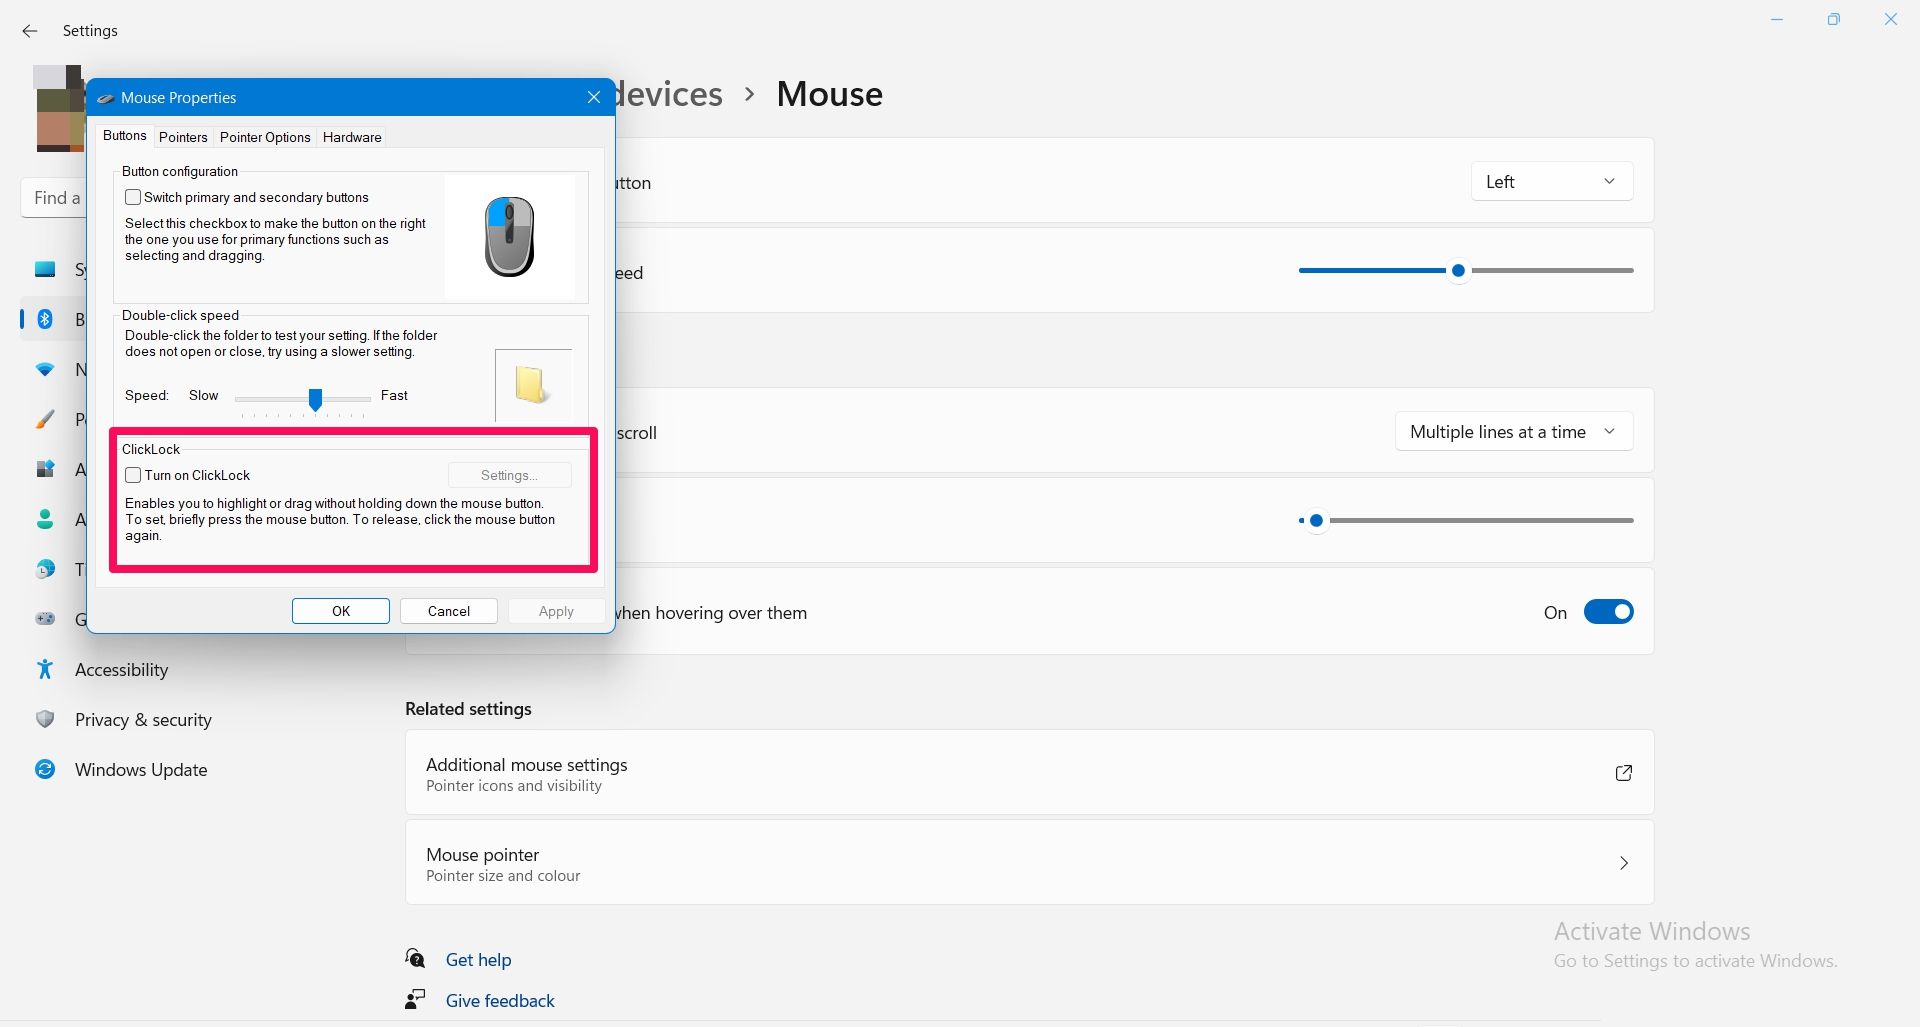  how to enable ClickLock on additional mouse settings page